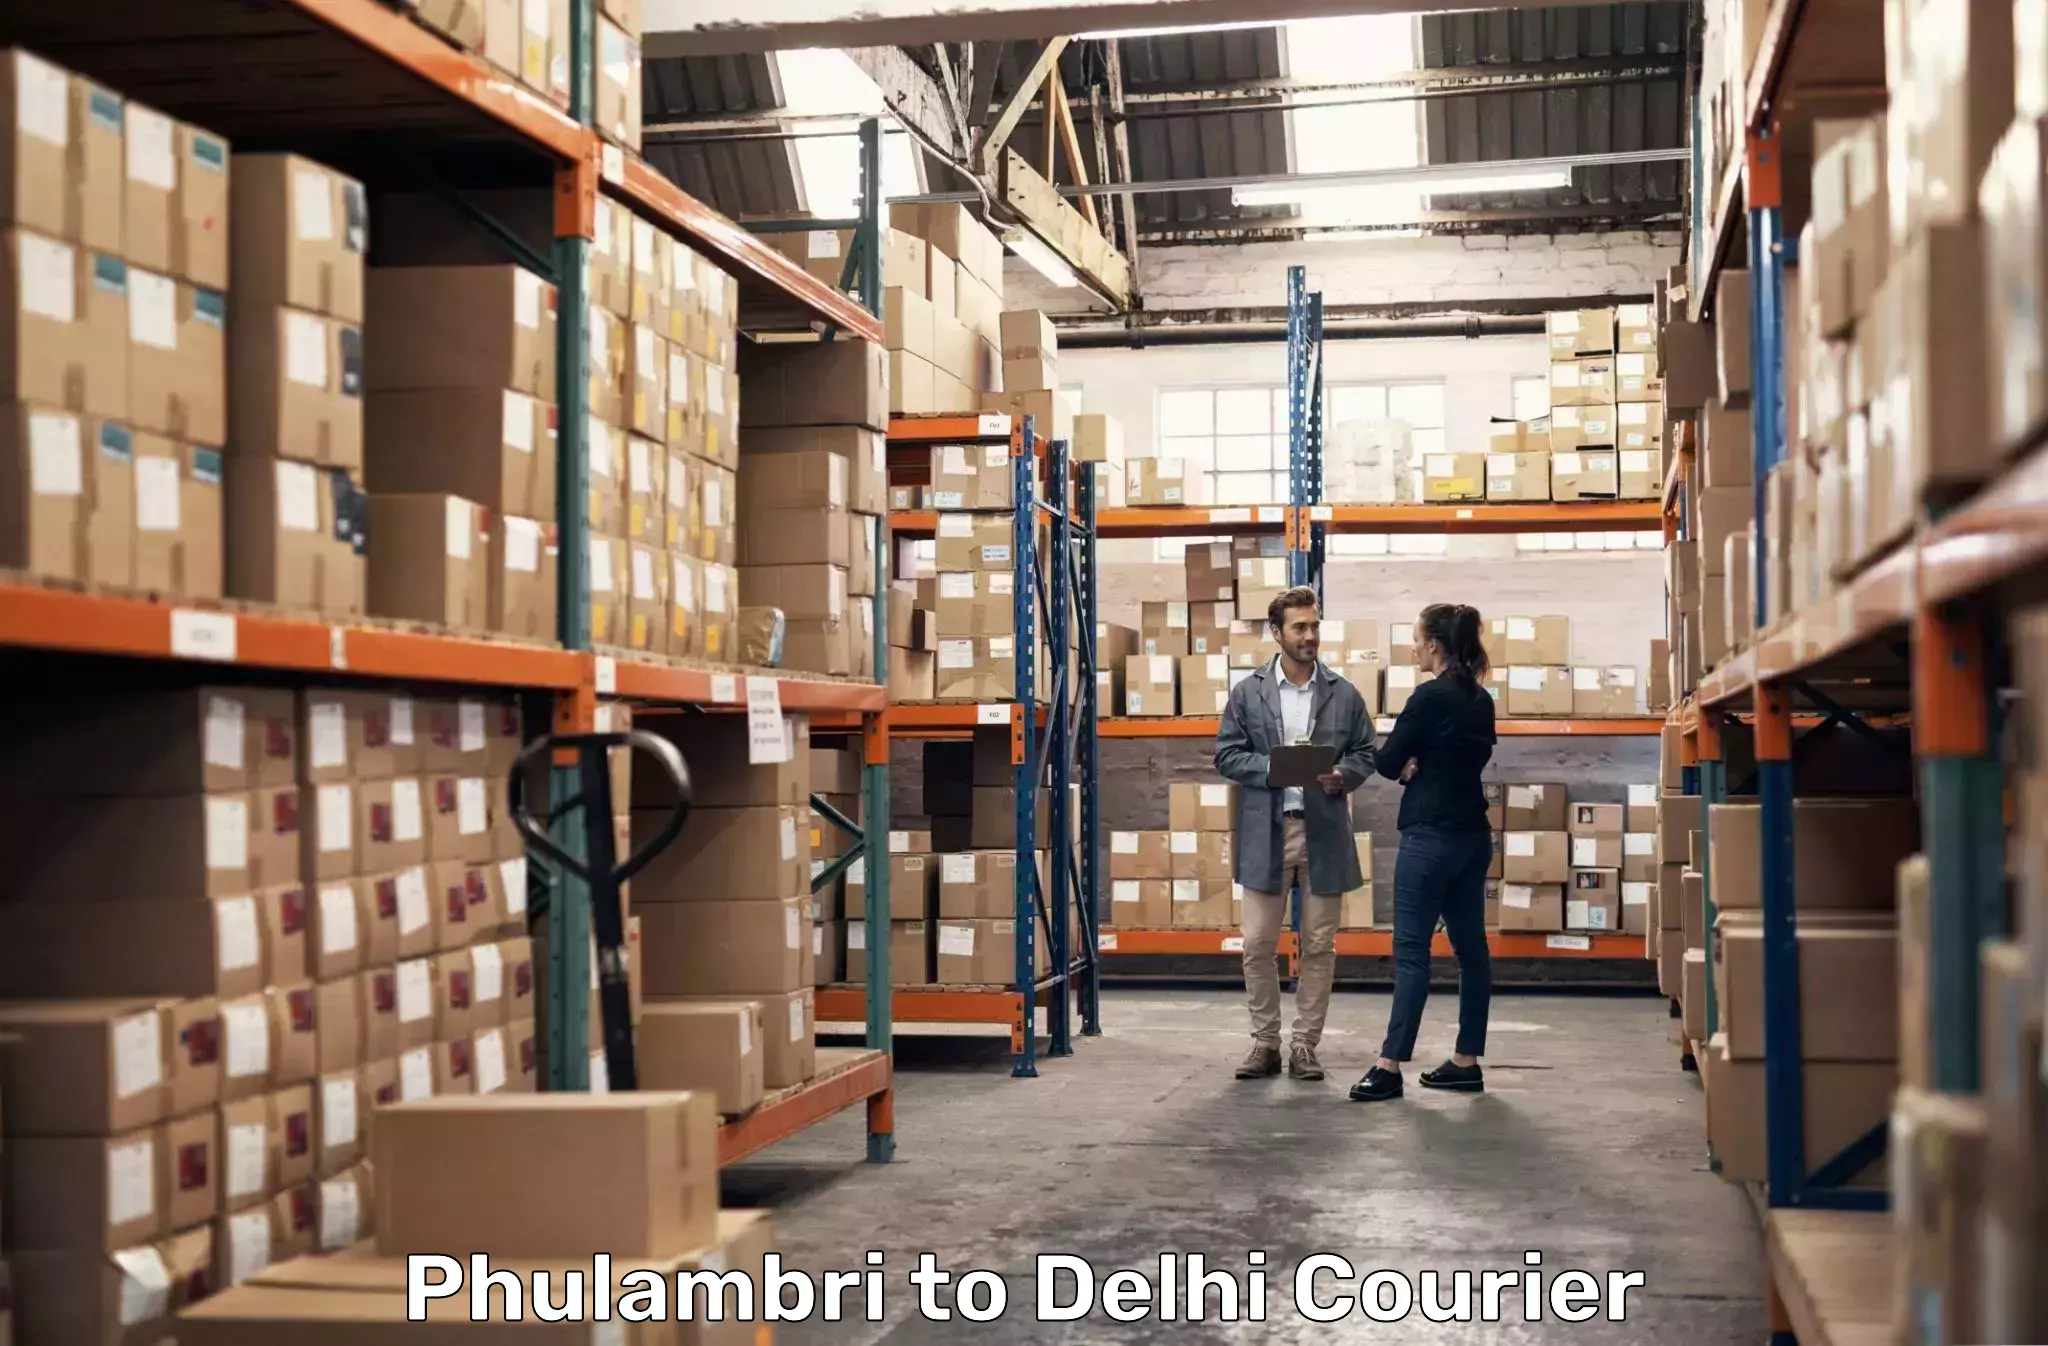 Subscription-based courier Phulambri to Delhi